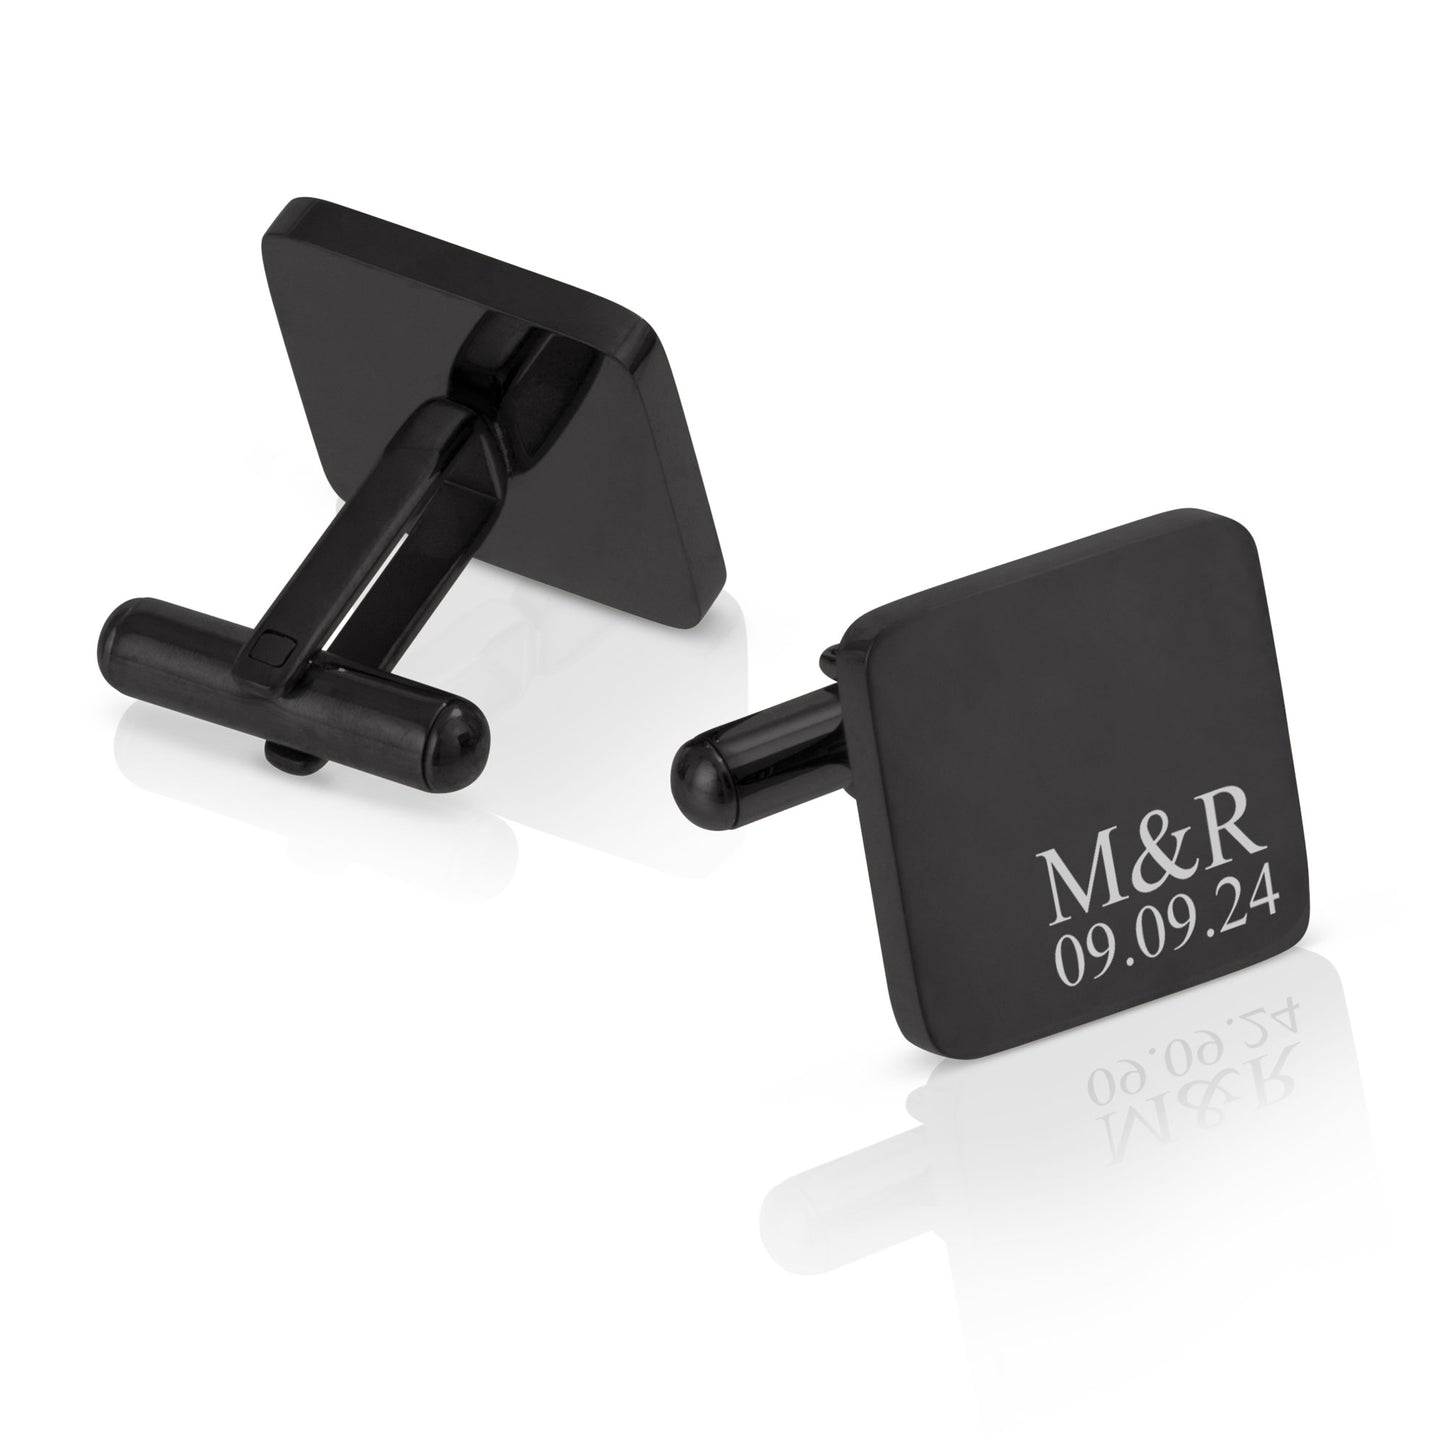 Personalised engraved stainless steel square men's cufflinks gift | custom initials groom wedding accessories valentines day anniversary